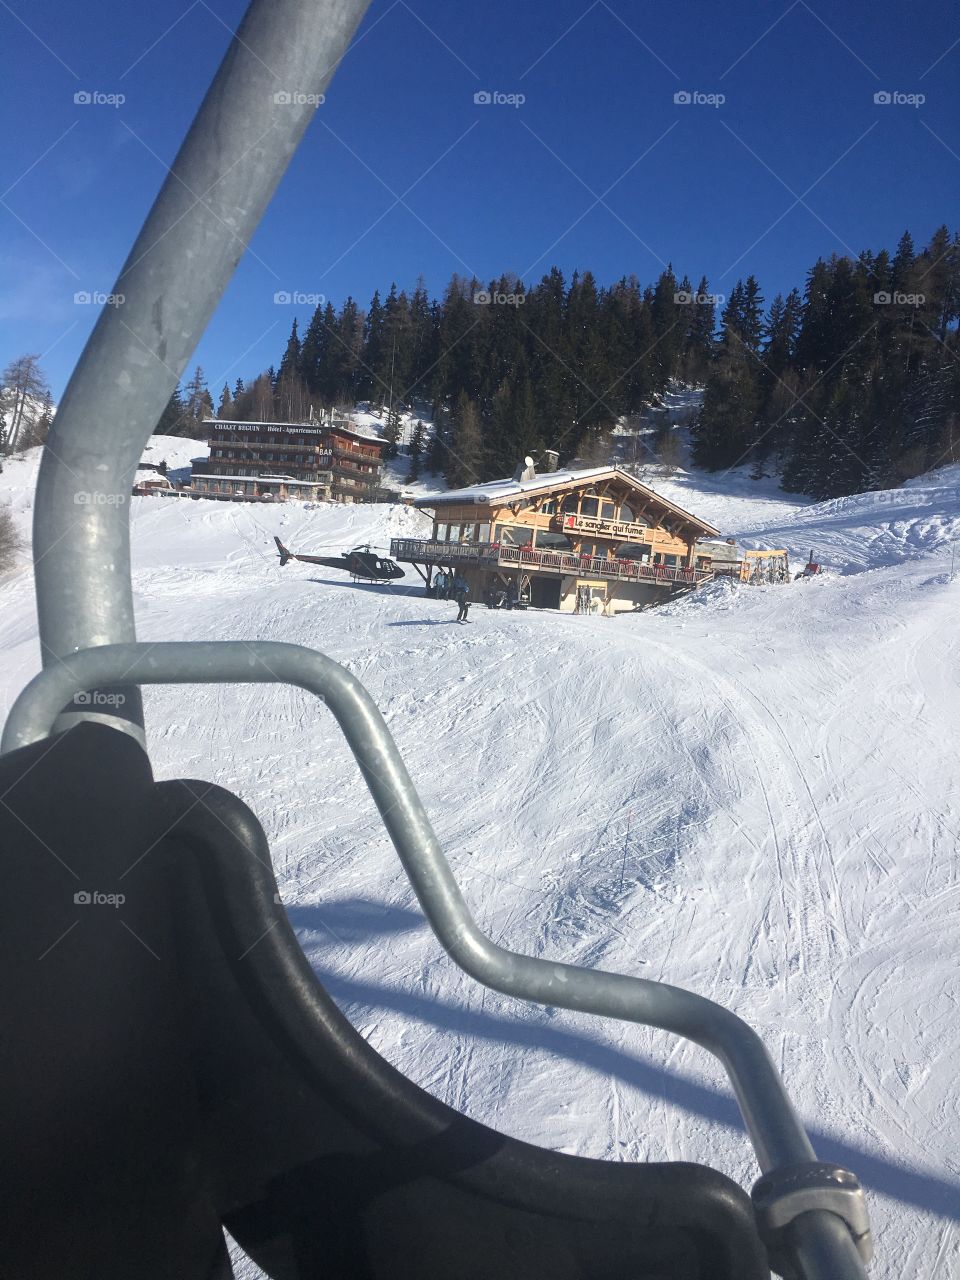 Ski restaurant on mountain with helicopter